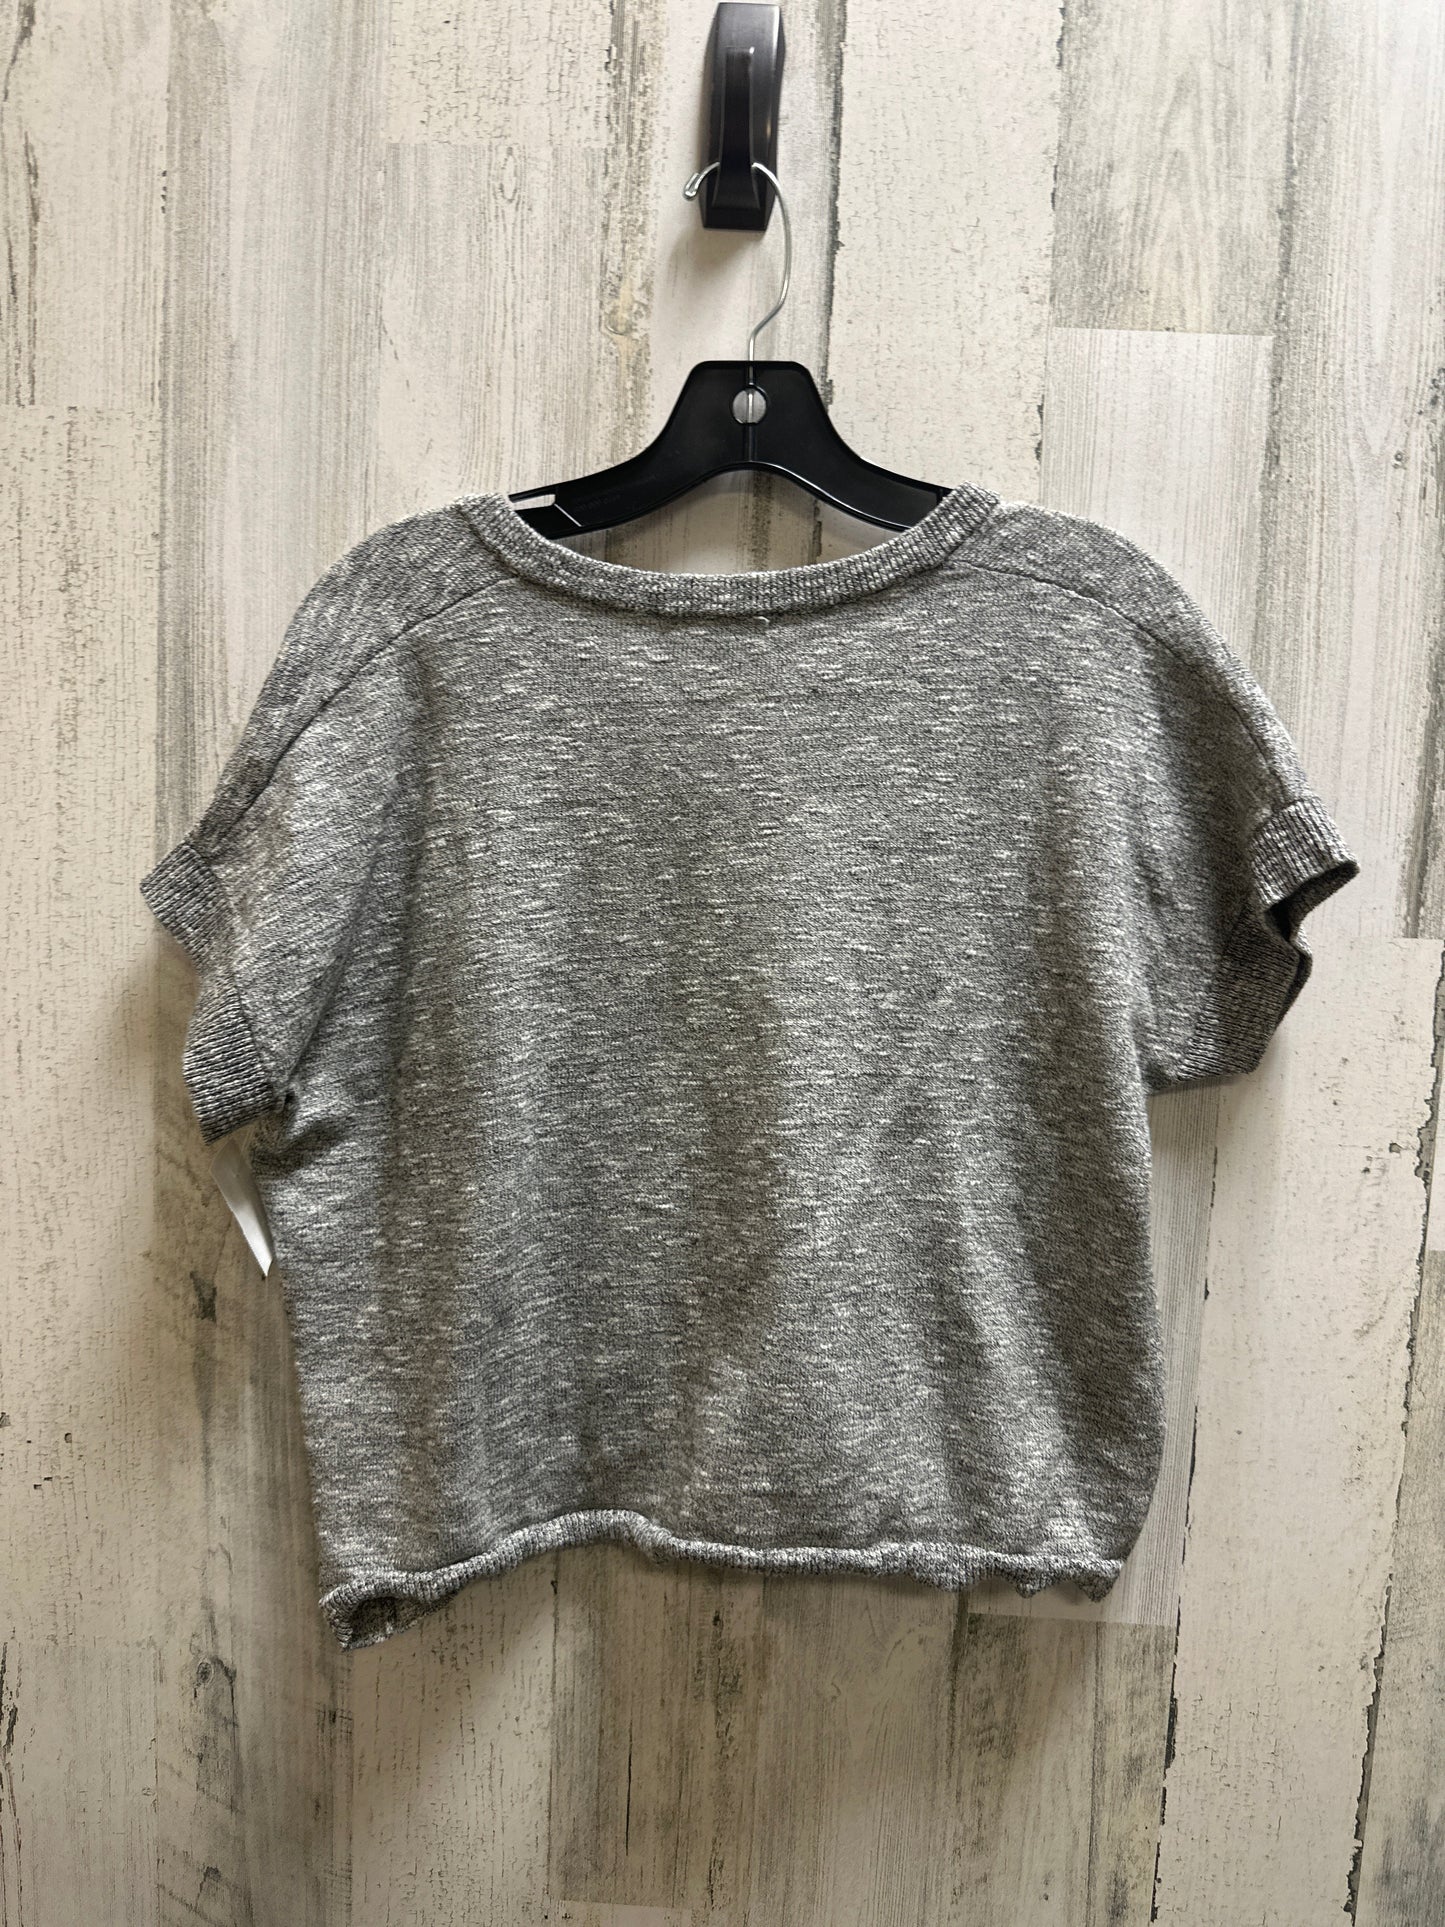 Grey Top Short Sleeve Madewell, Size Xs